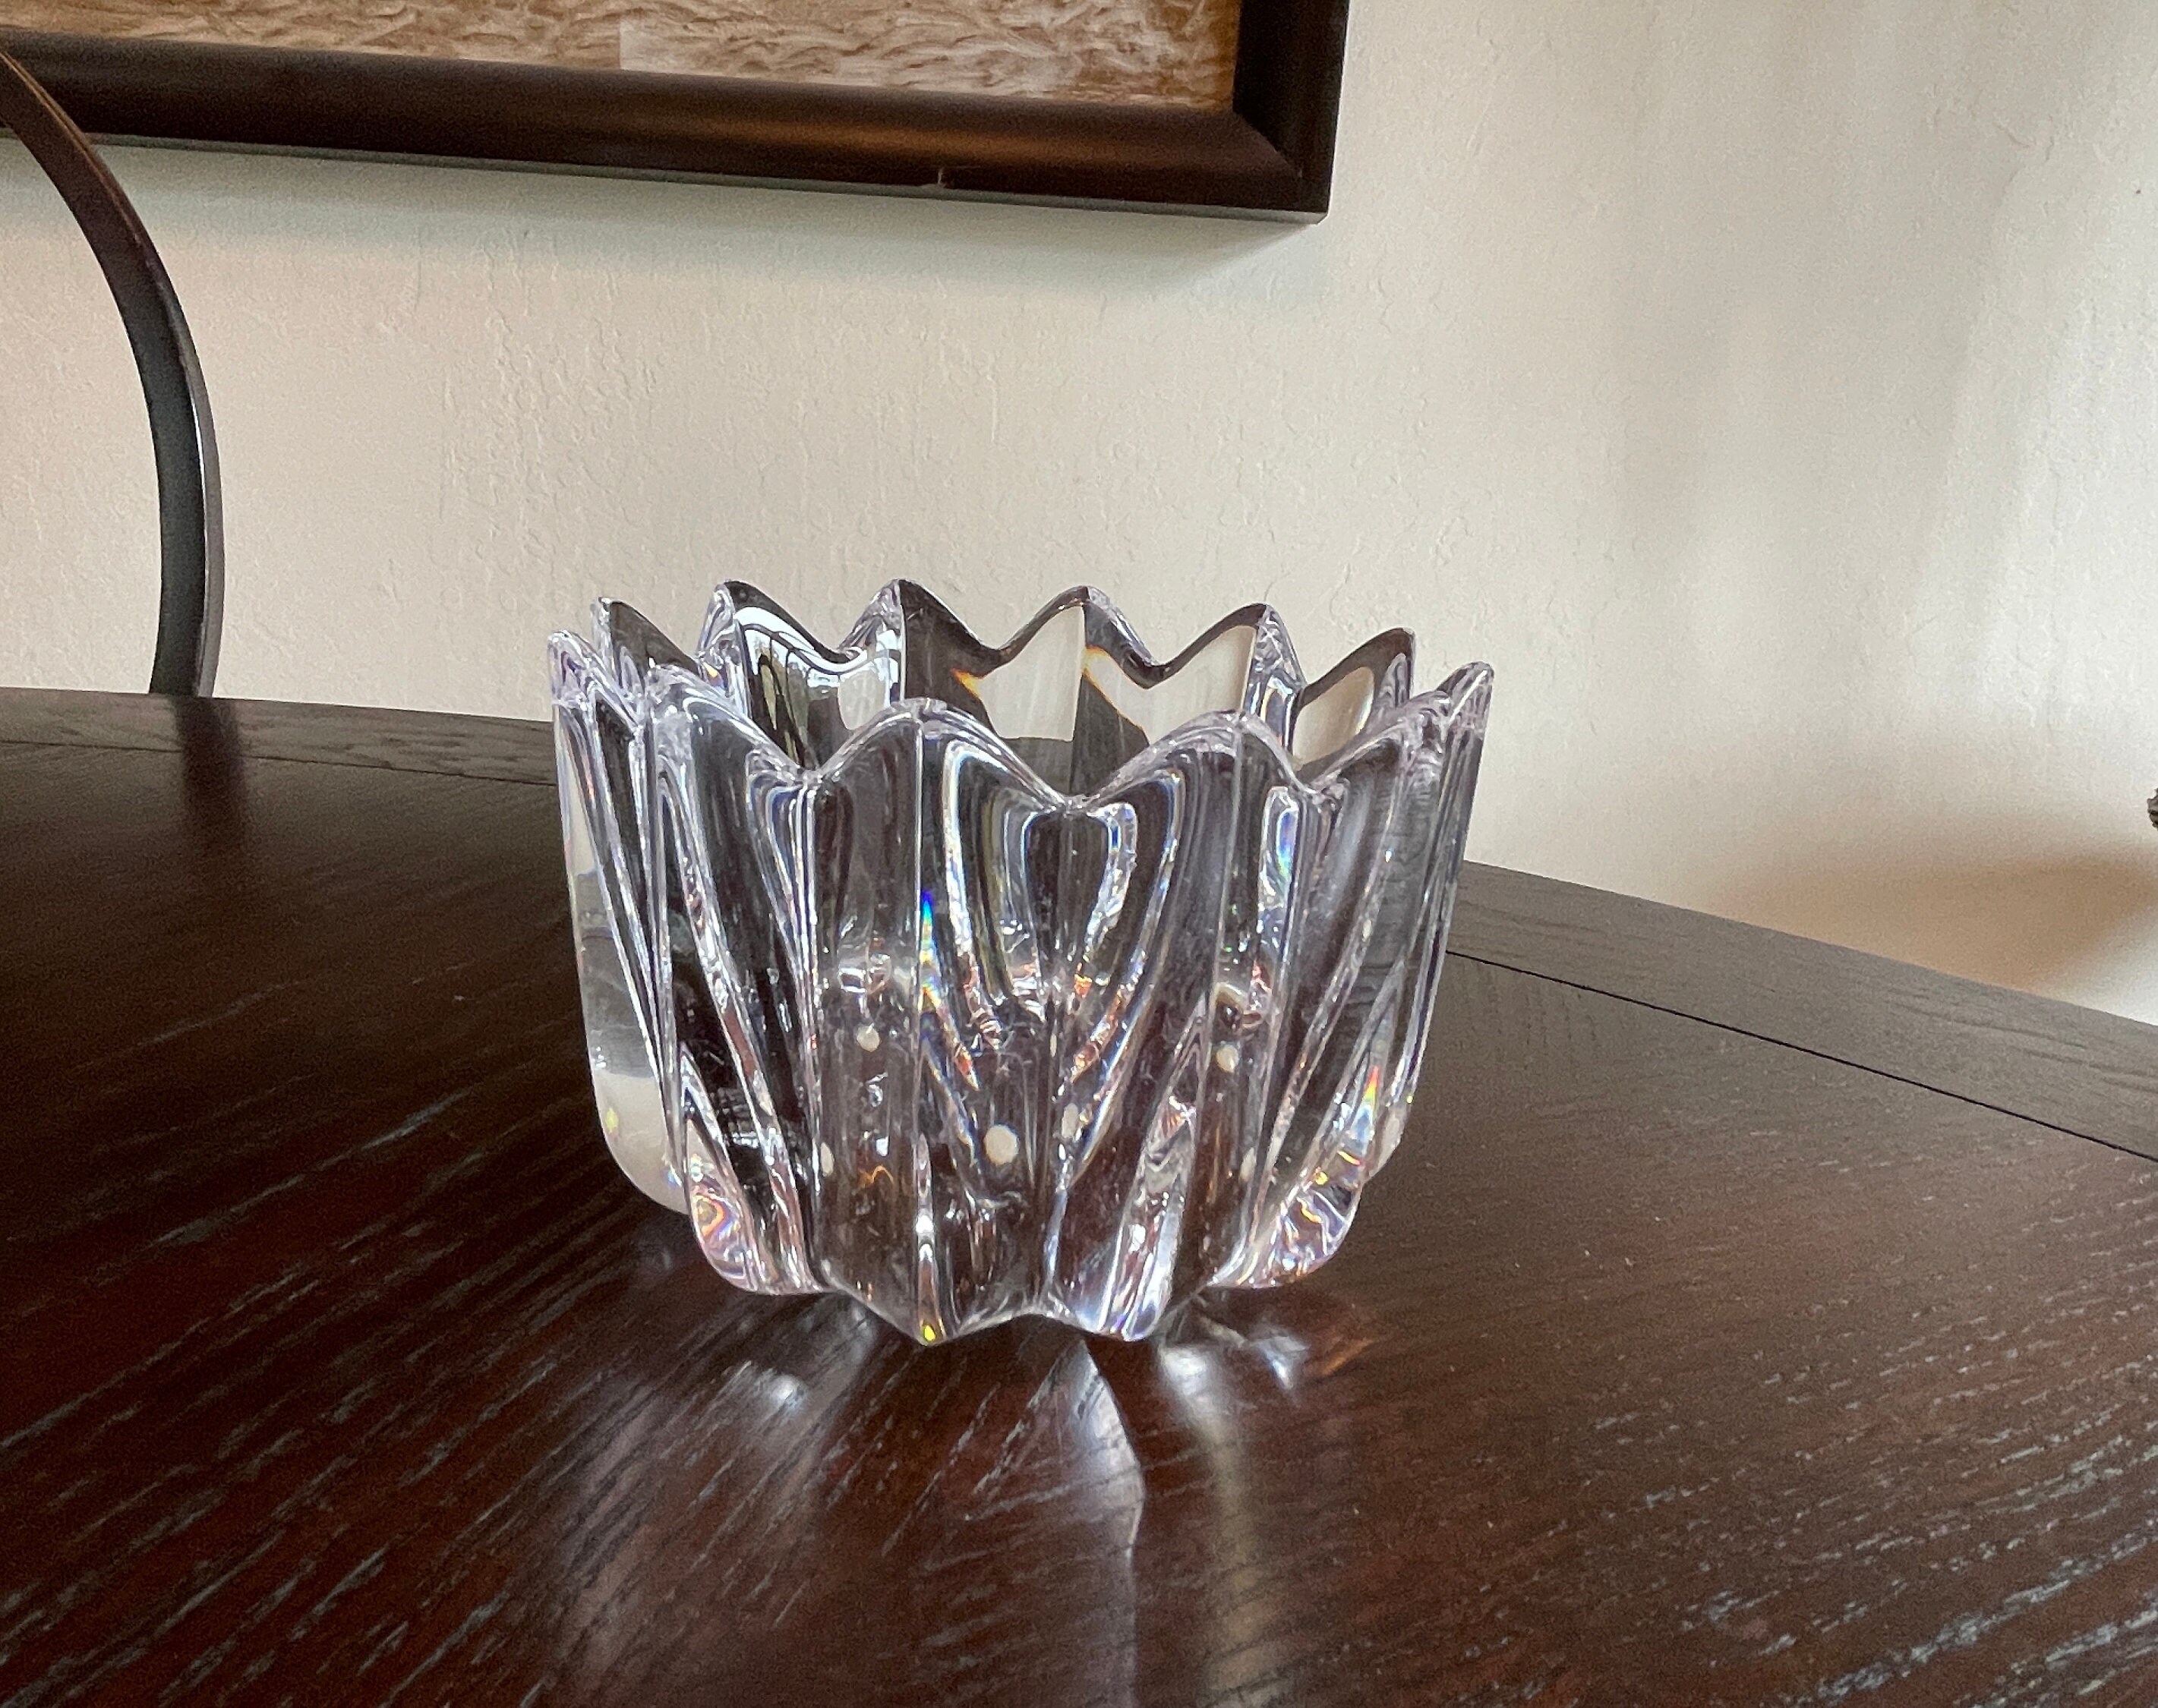 Clear Crystal Glass Scalloped Splash Orrefors Sweden Candy Dish Bowl –  Mitchell Sotka